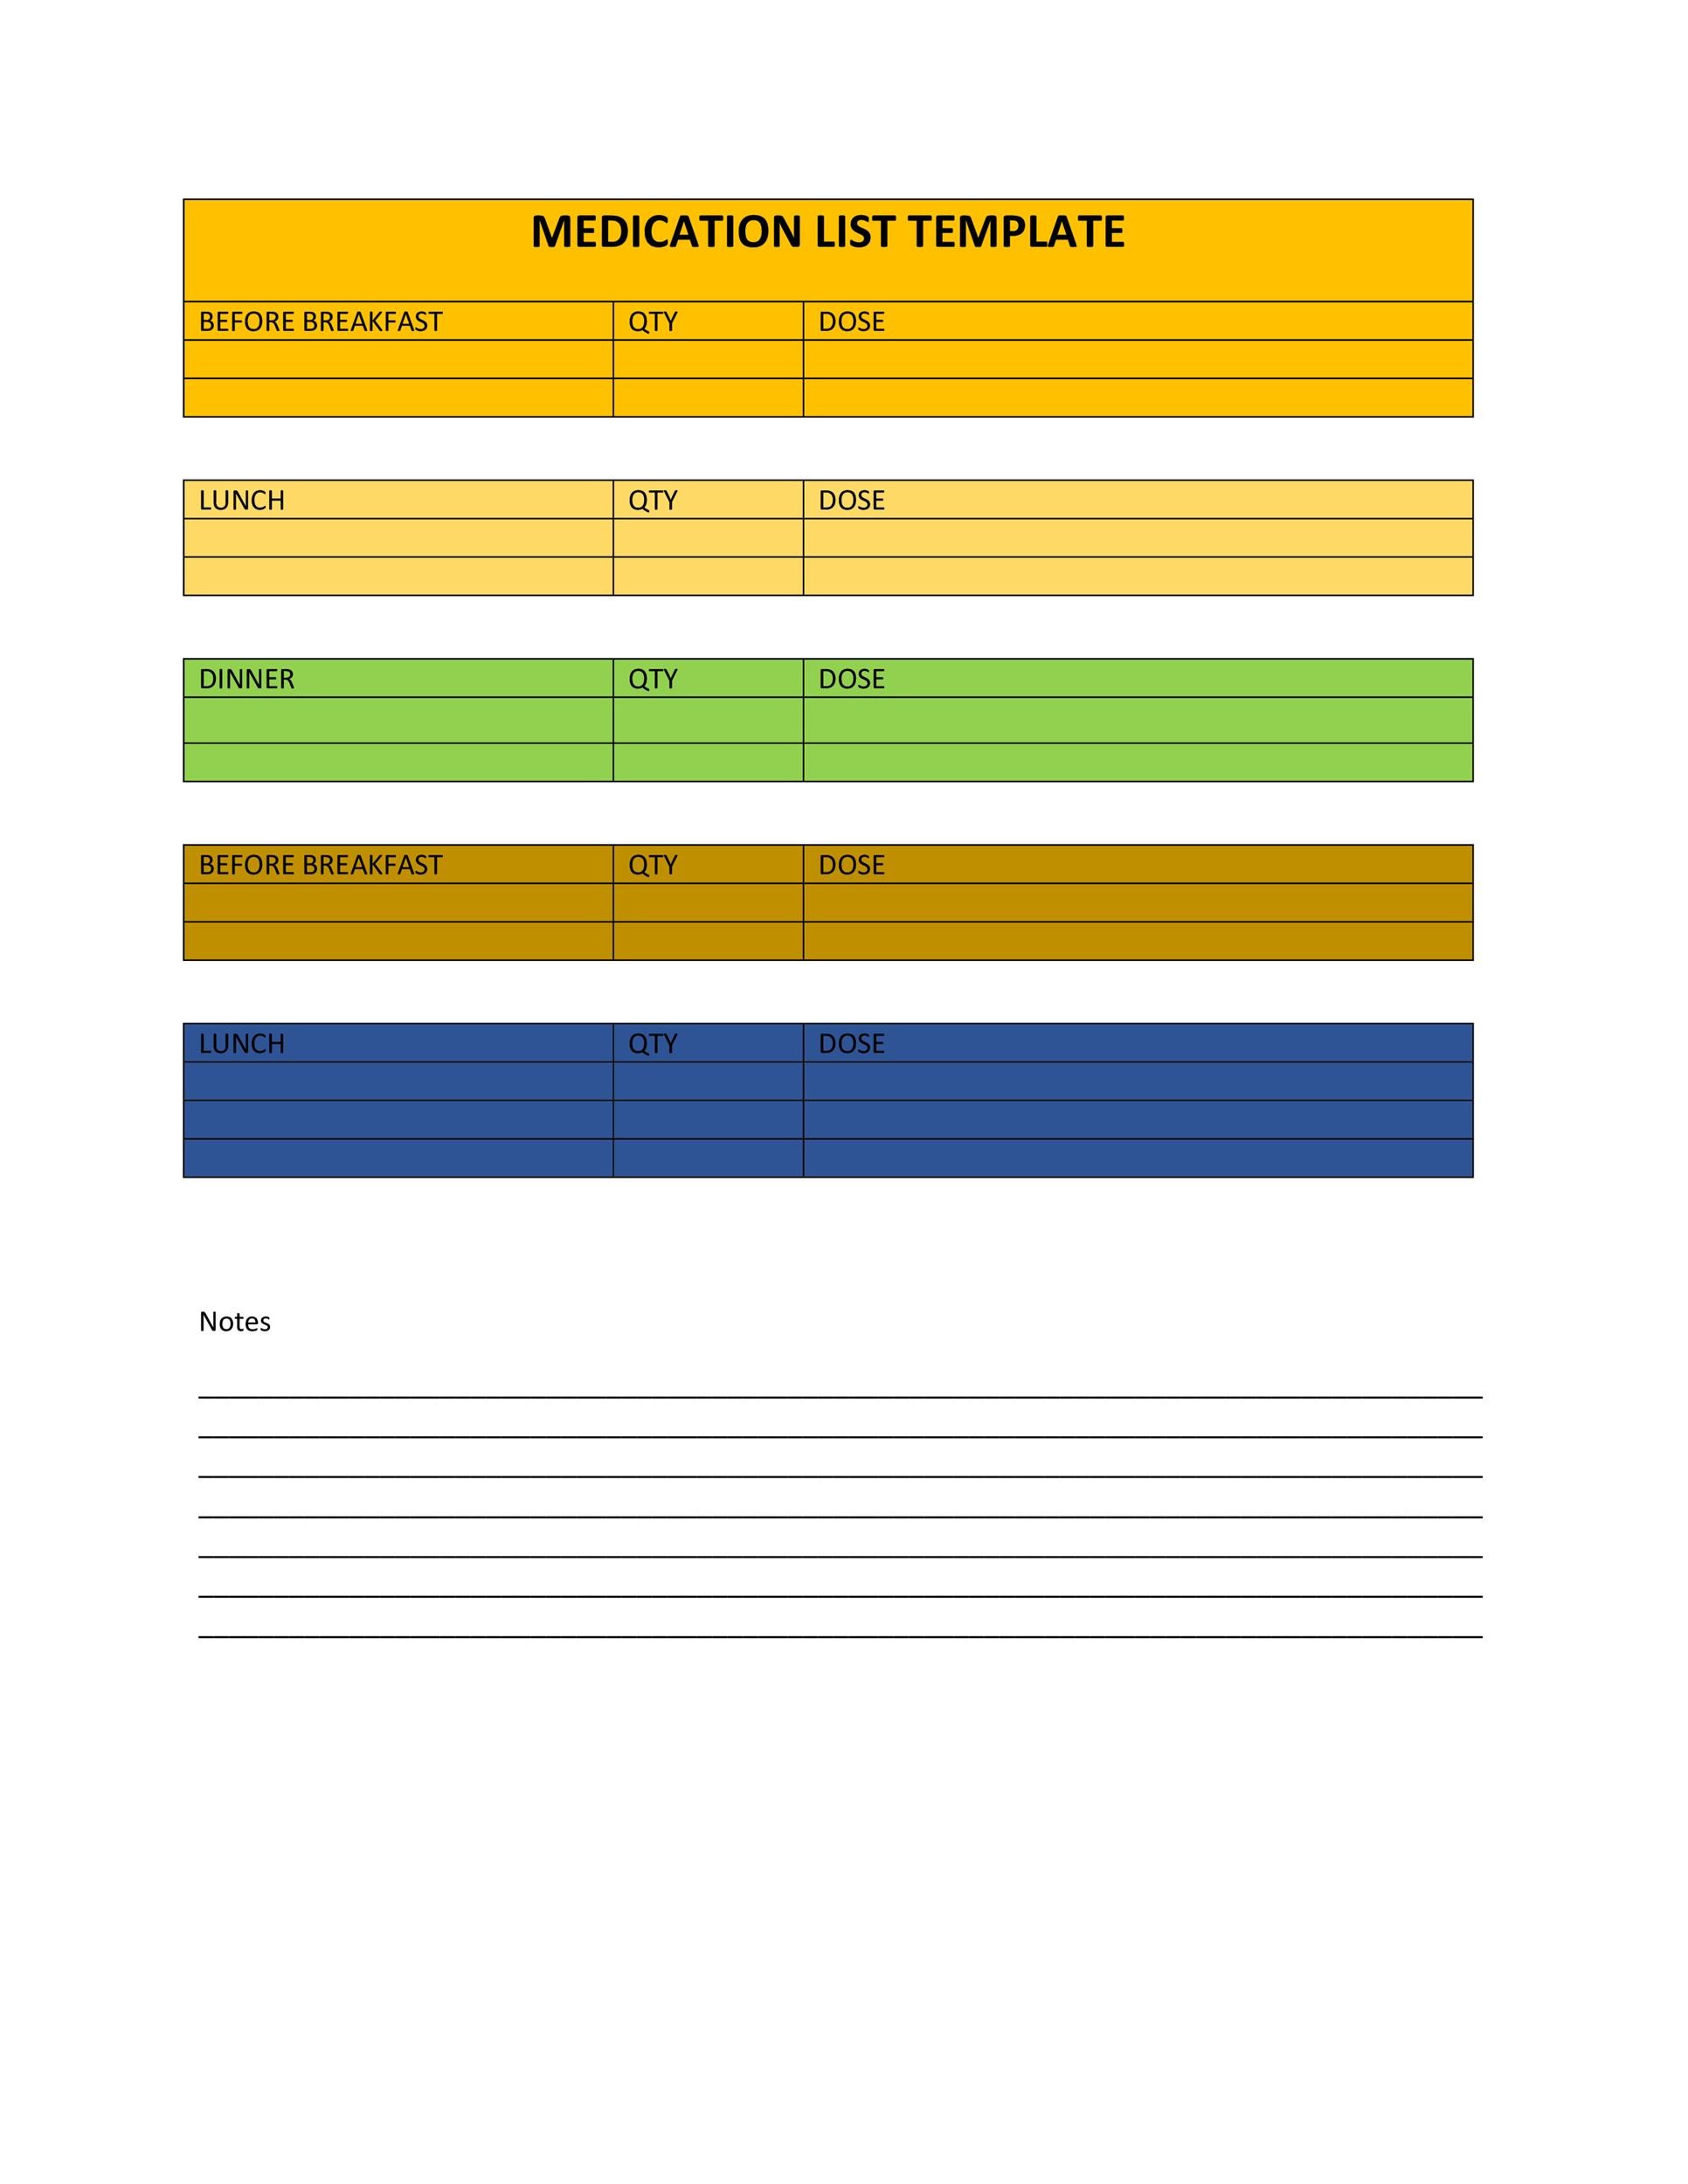 Free medication schedule template 21